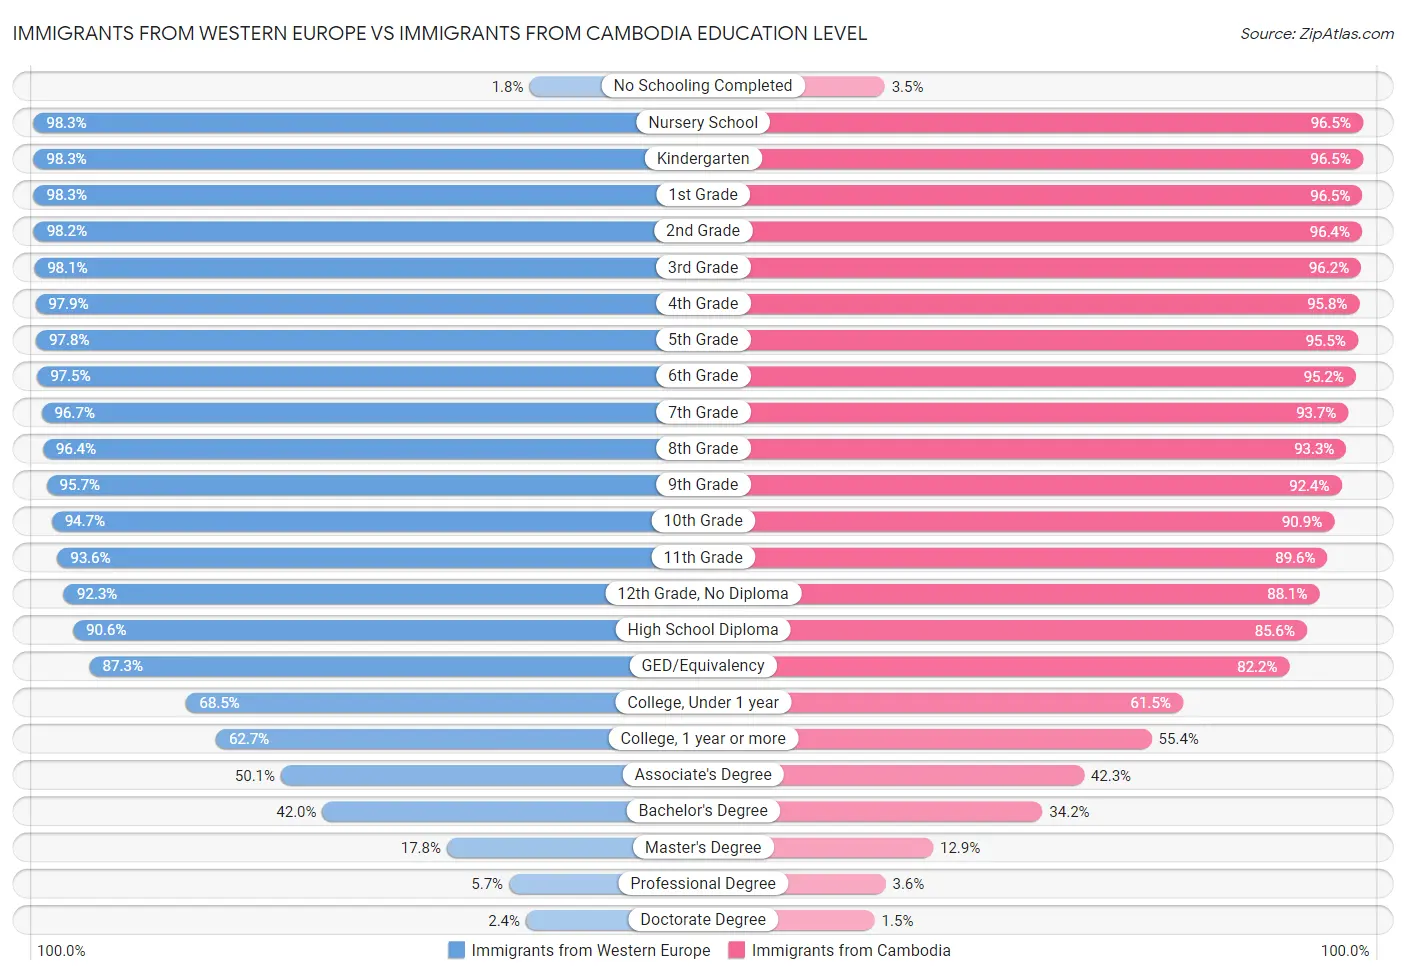 Immigrants from Western Europe vs Immigrants from Cambodia Education Level